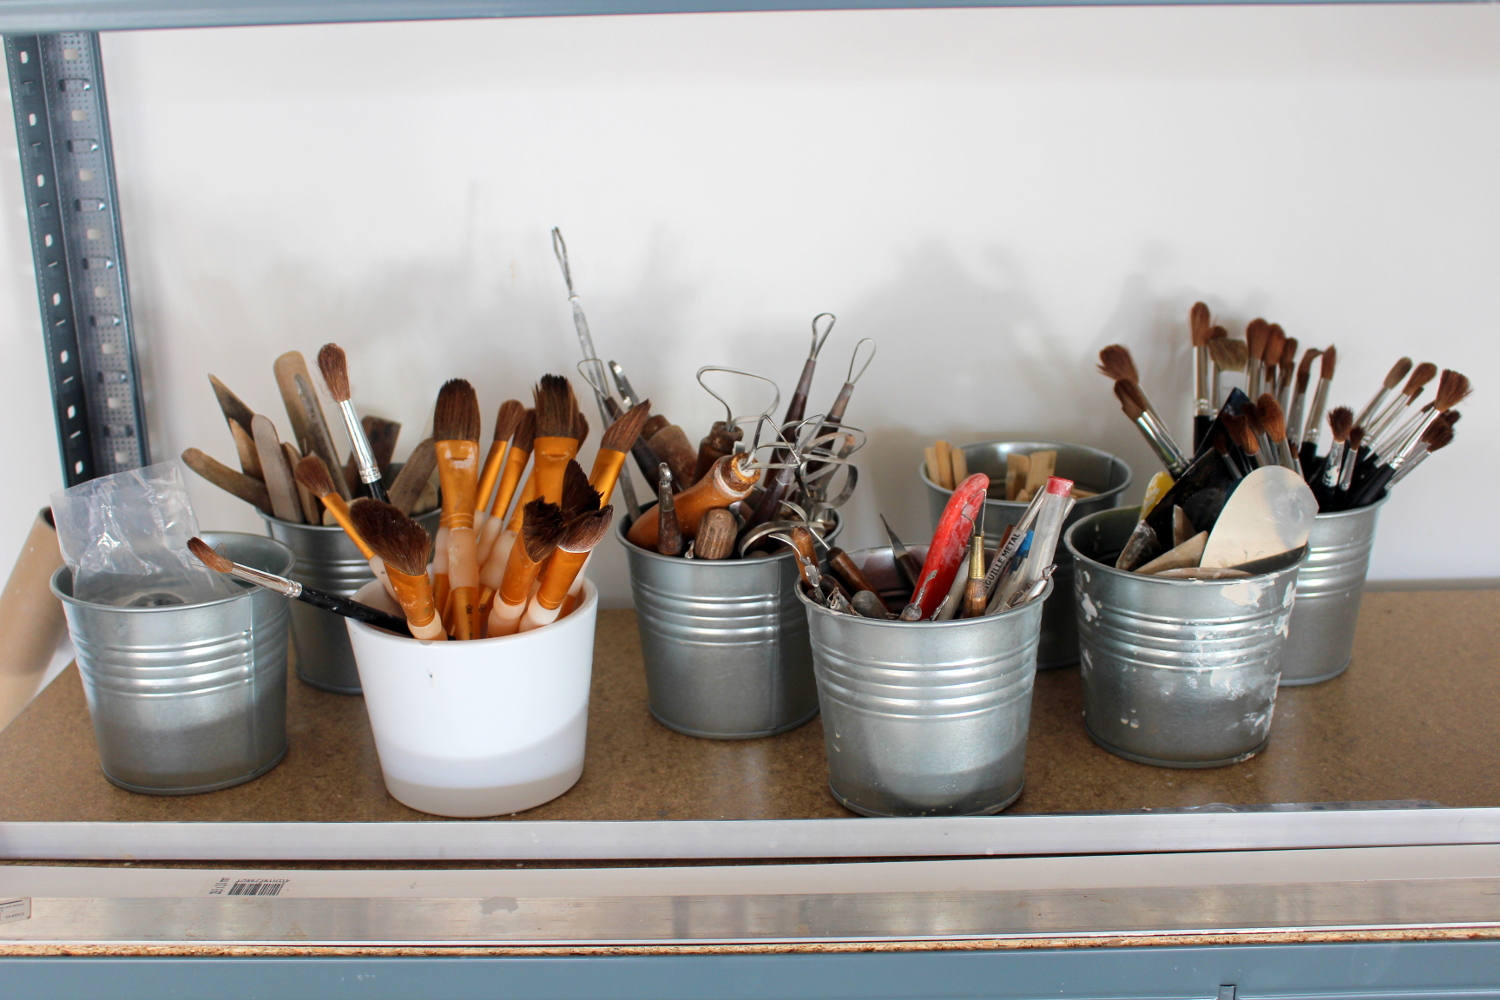 brushes organized in buckets on a shelf